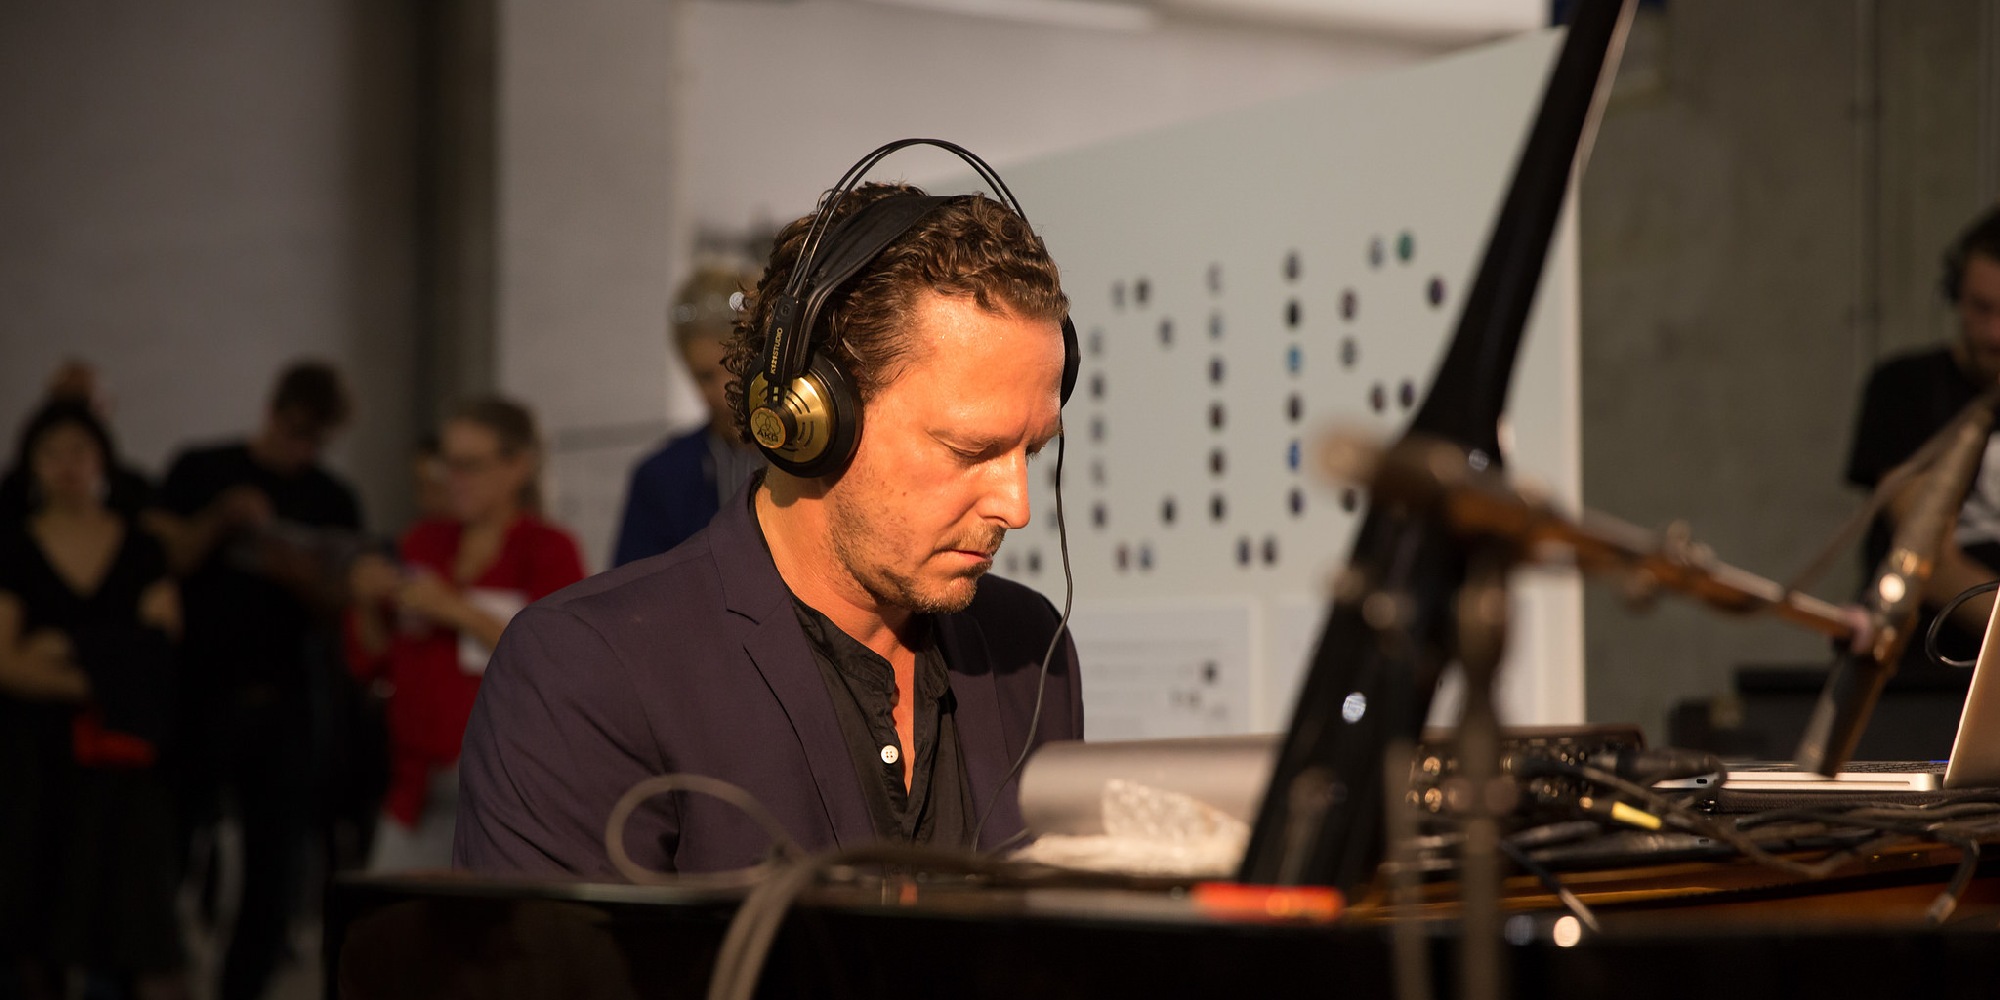 Composer Rupert Huber (AT) performing at the Ars Electronica Opening at PostCity